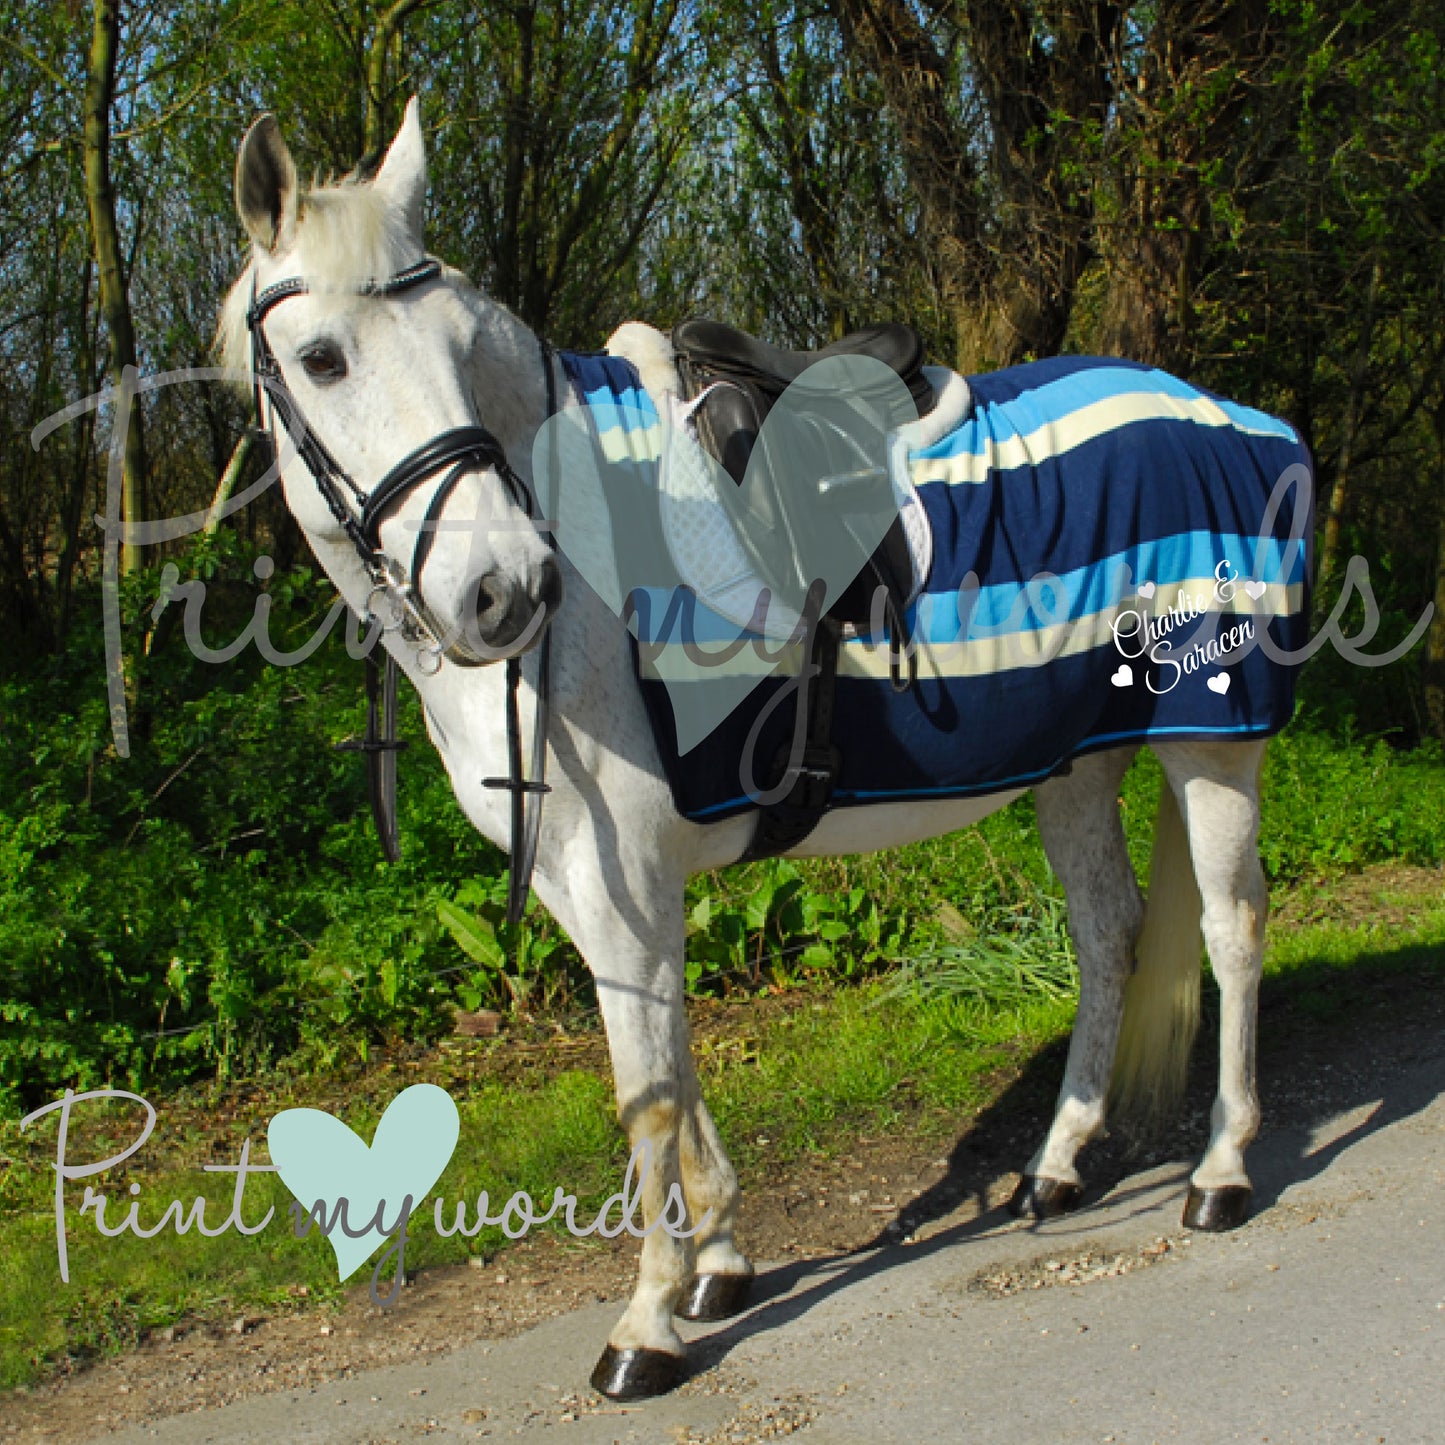 Personalised Ride On Striped Fleece Rug - Hearts Style